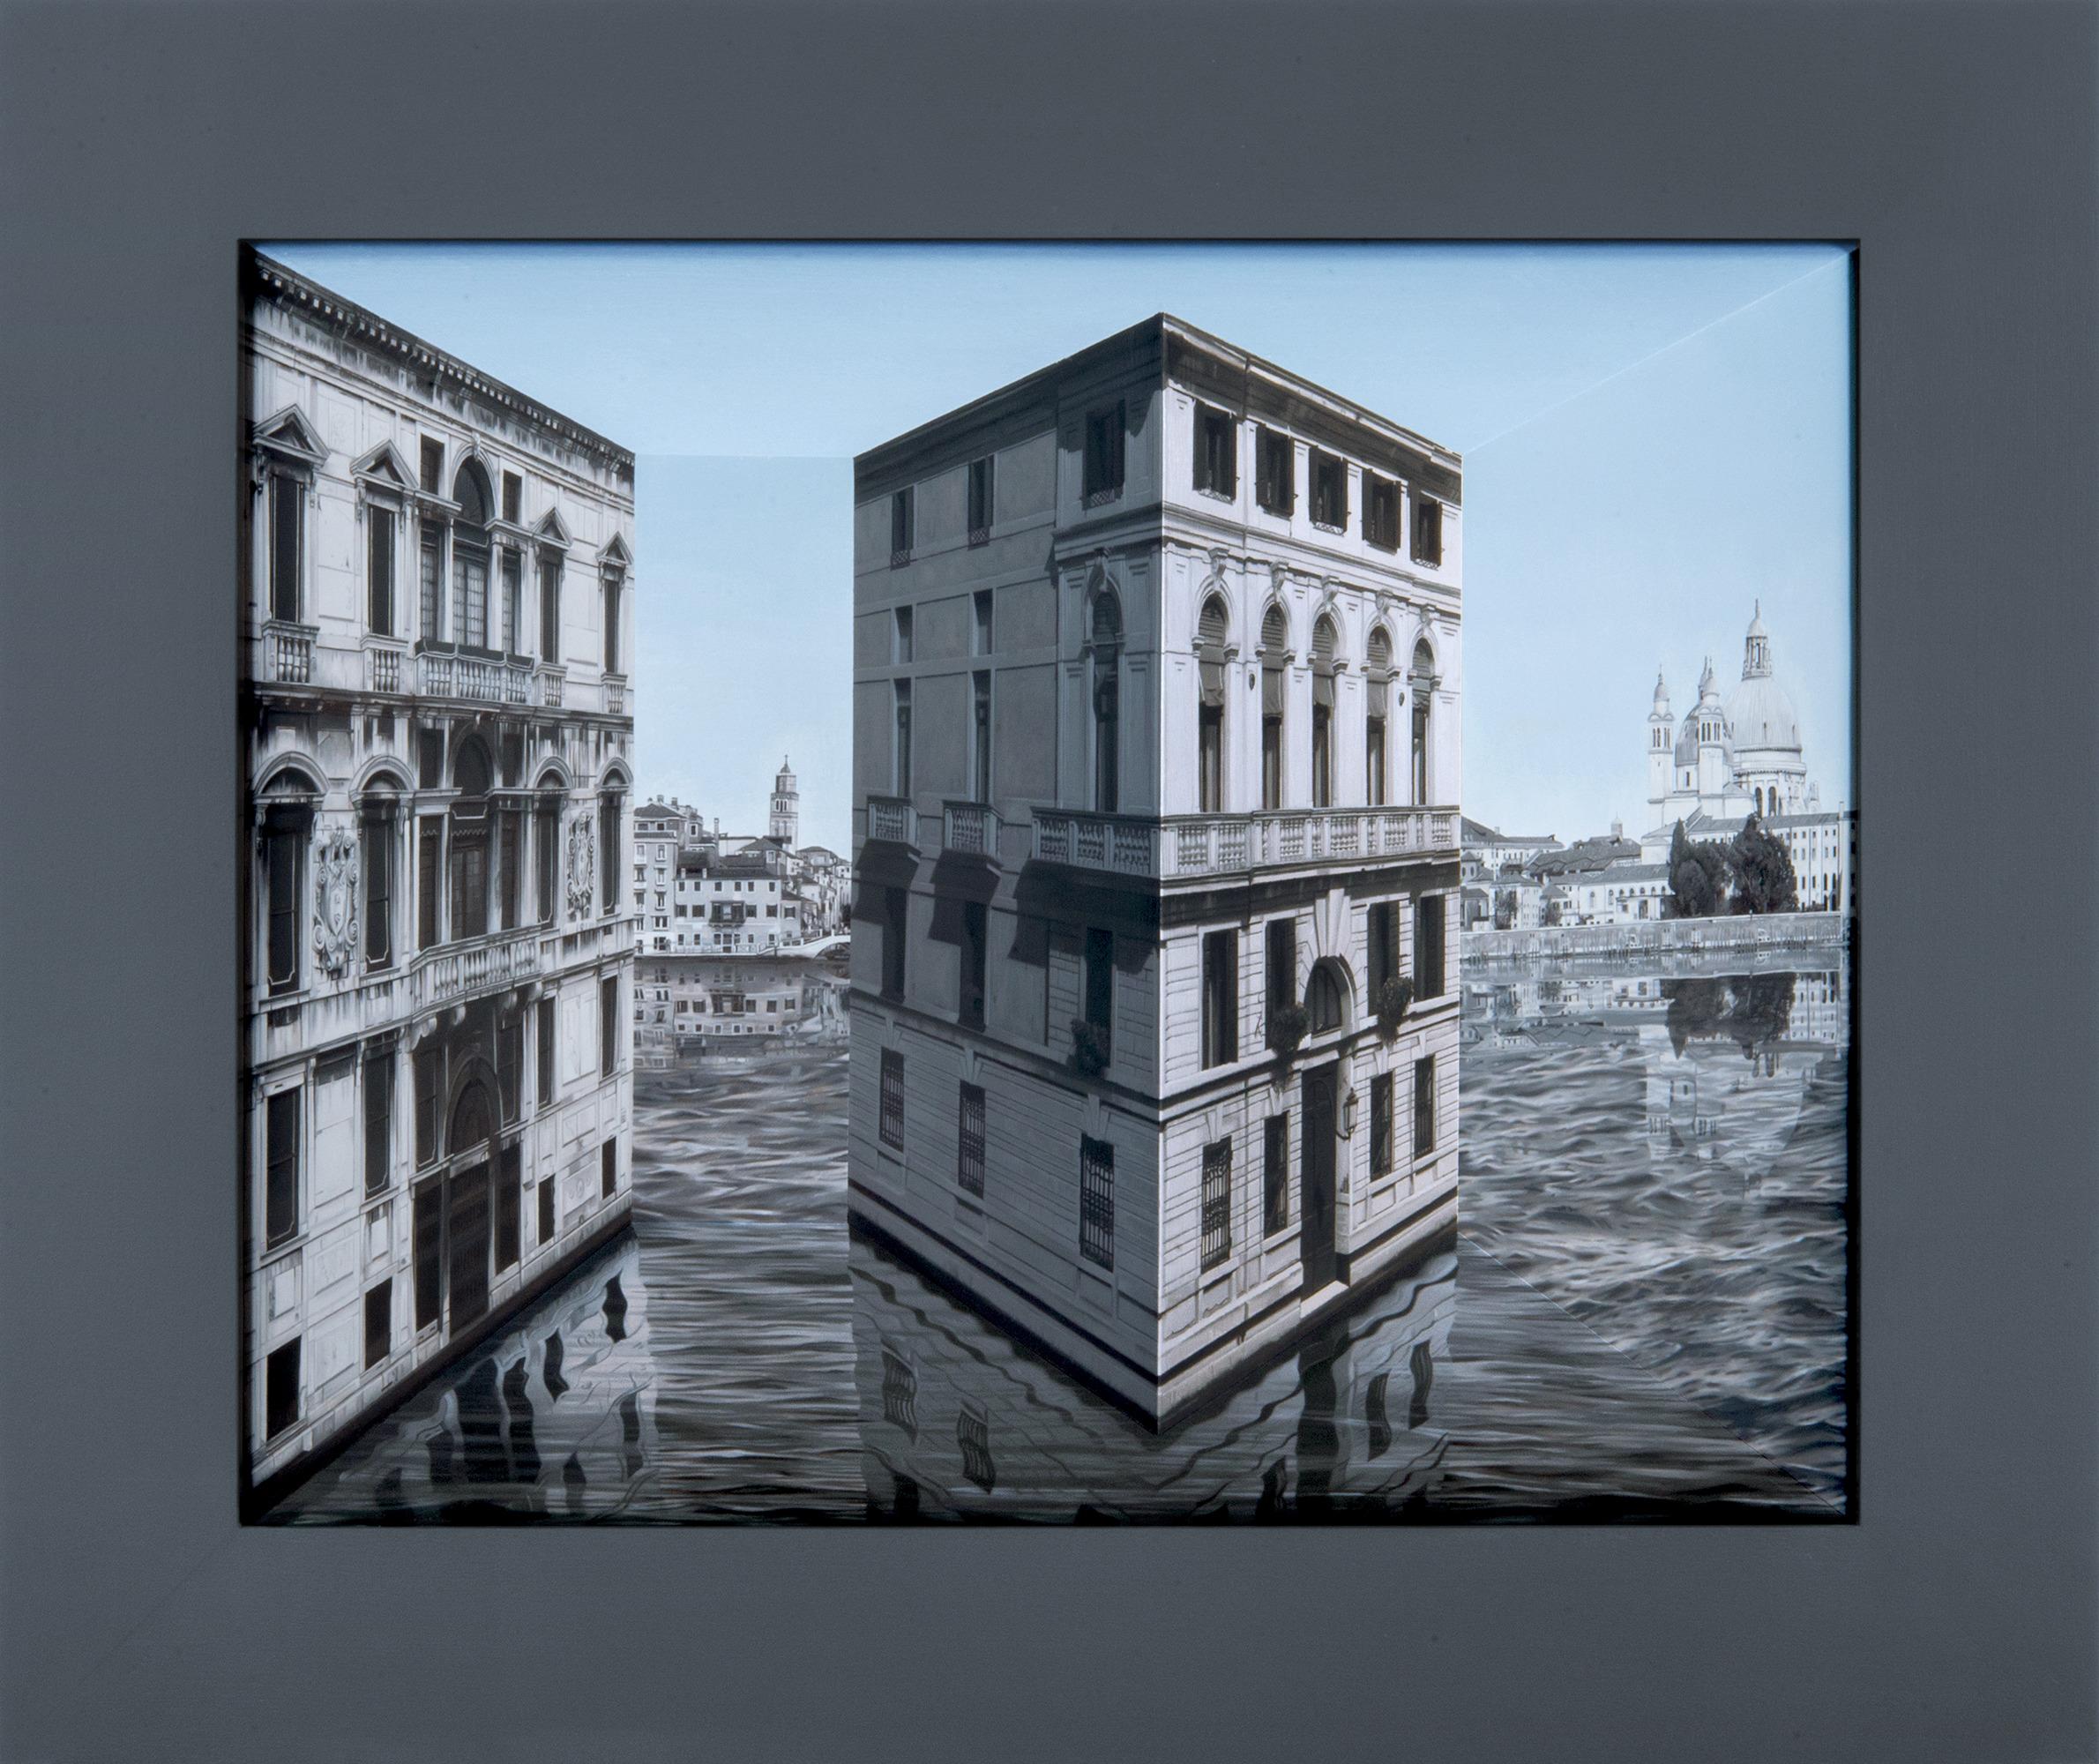 Patrick Hughes
b. 1939  British

Dark Light

Oil on board construction

Another success from British artist Patrick Hughes, Dark Light displays a three-dimensional cityscape of the famed Venetian canals, a motif for which Hughes has become renowned.